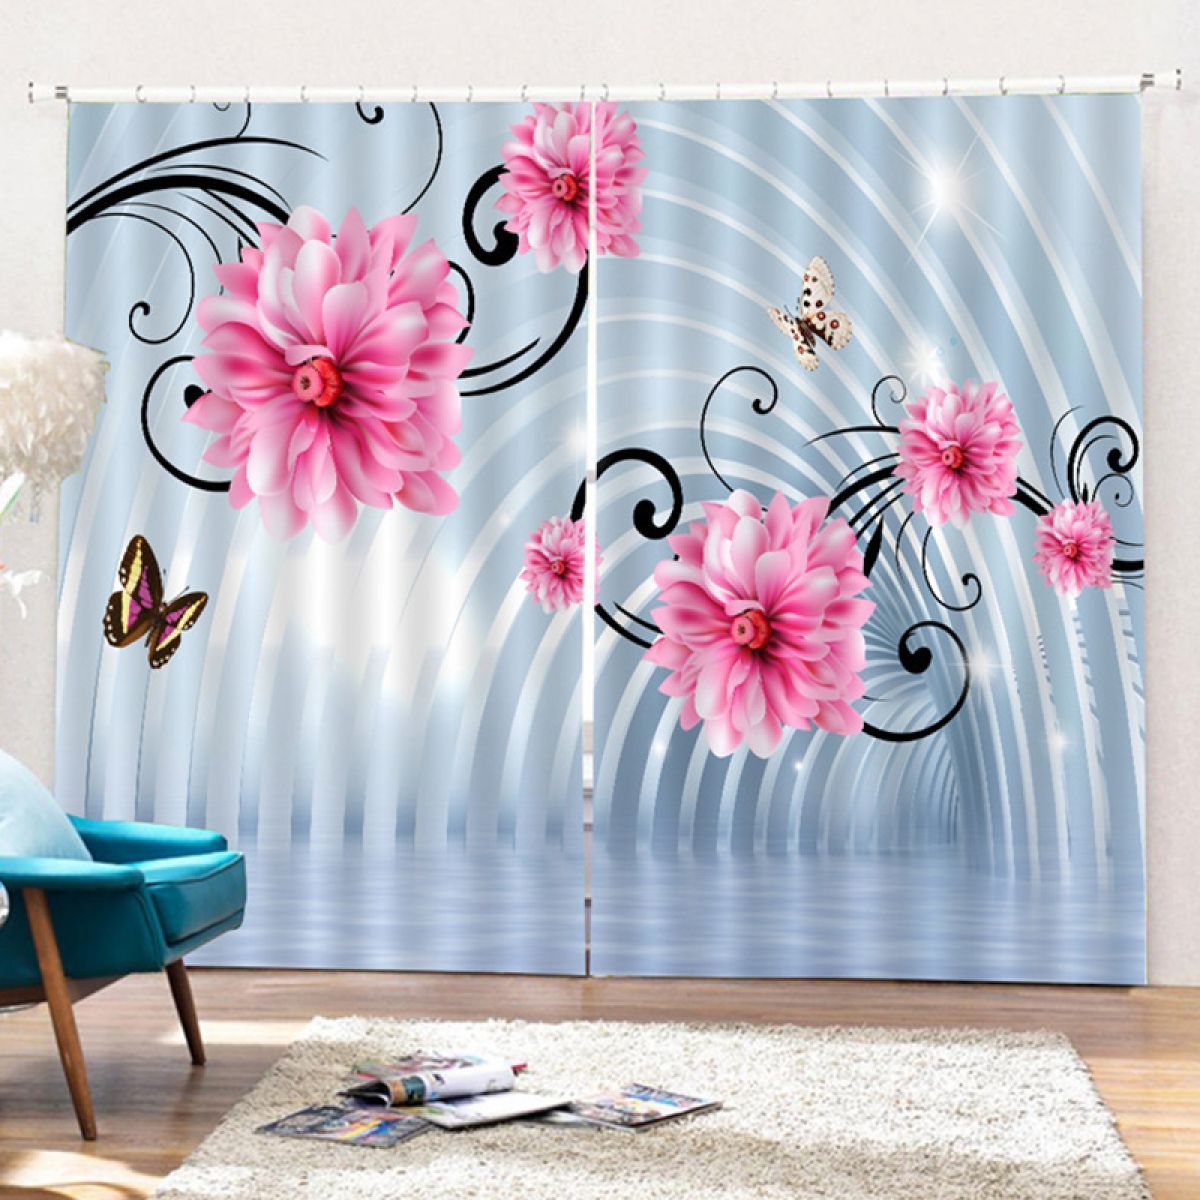 cloister flower and butterfly printed window curtain home decor 8623